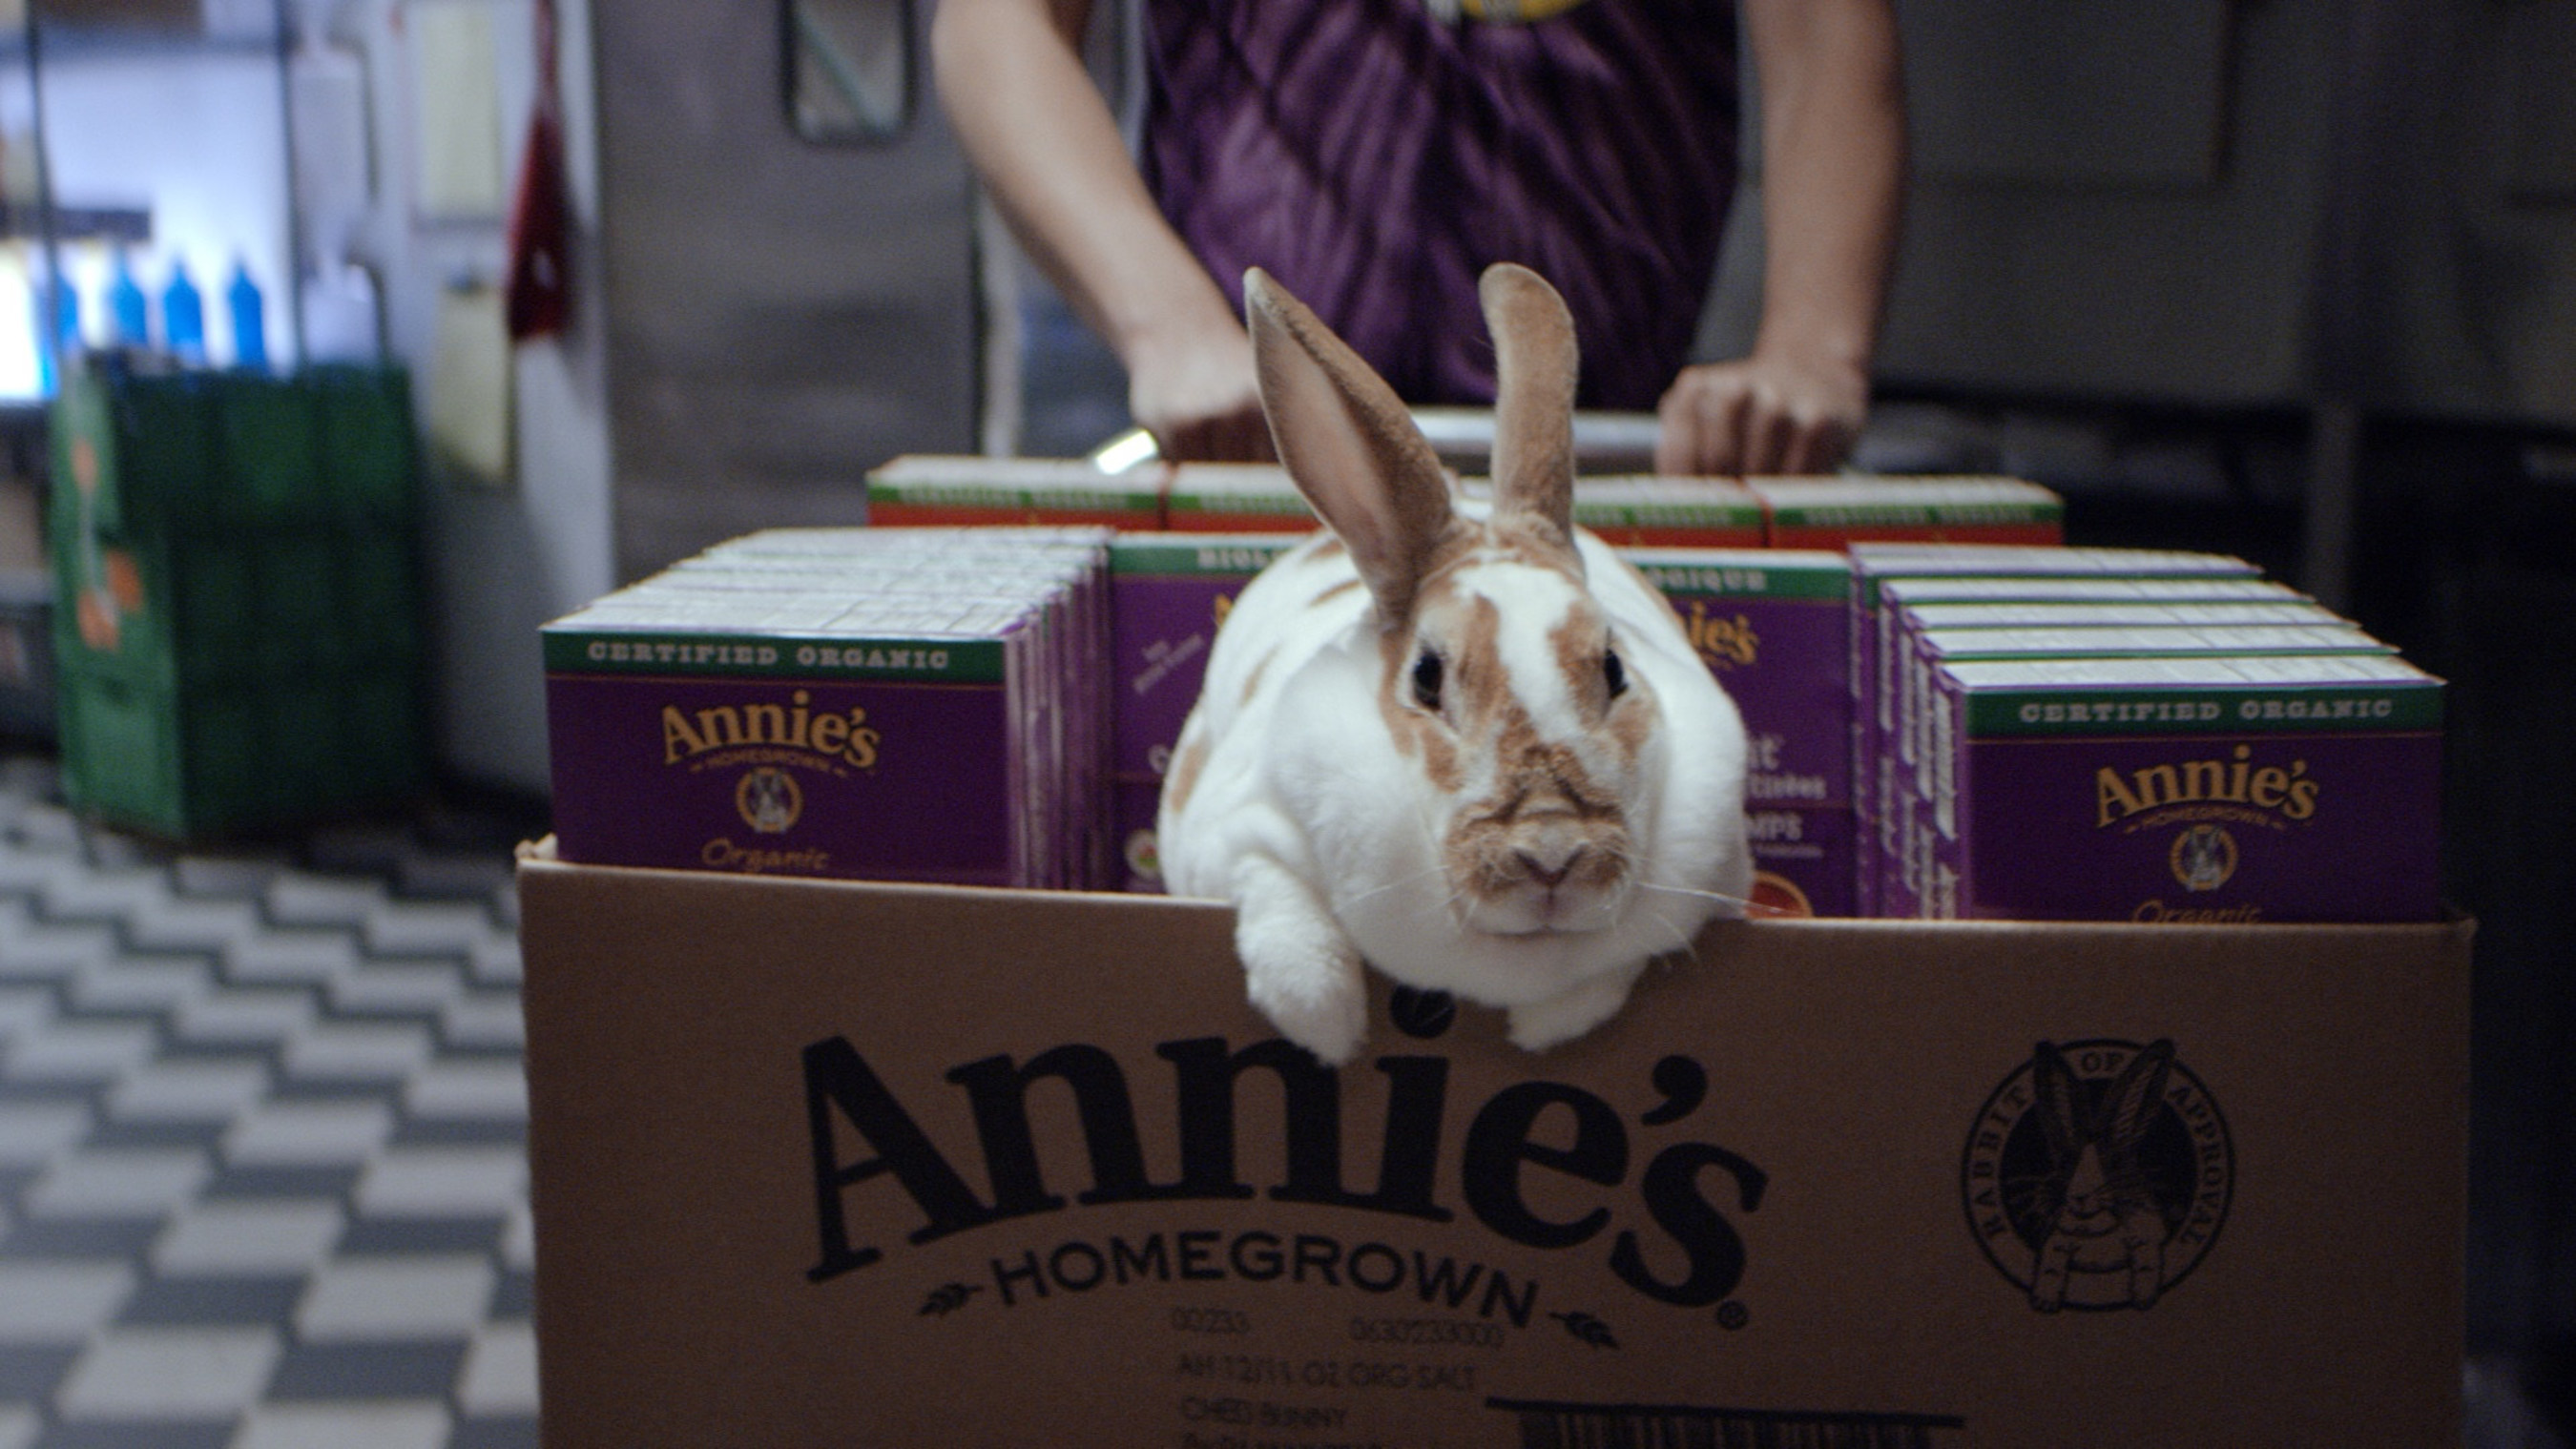 Annie's, Inc. - "Organic for Everybunny(TM)"